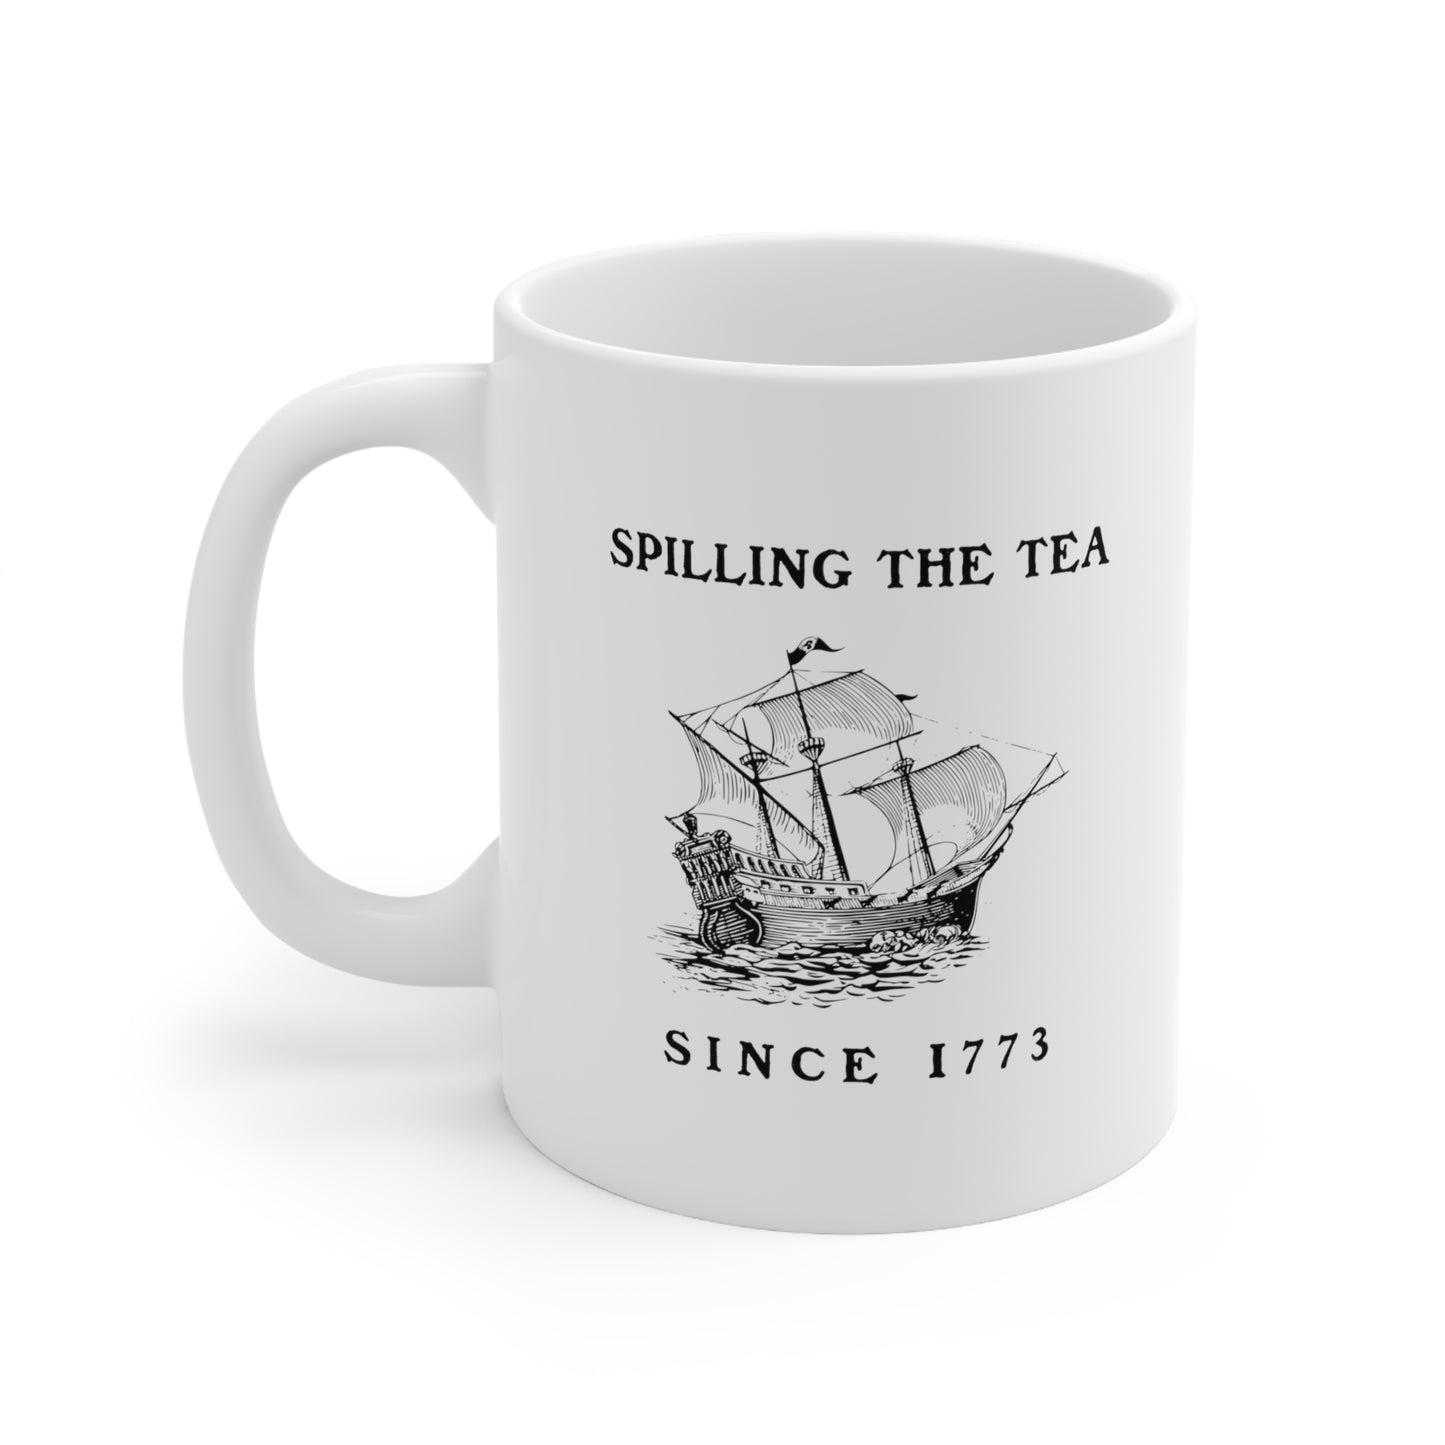 Funny historical event coffee mug with Boston Tea Party ship